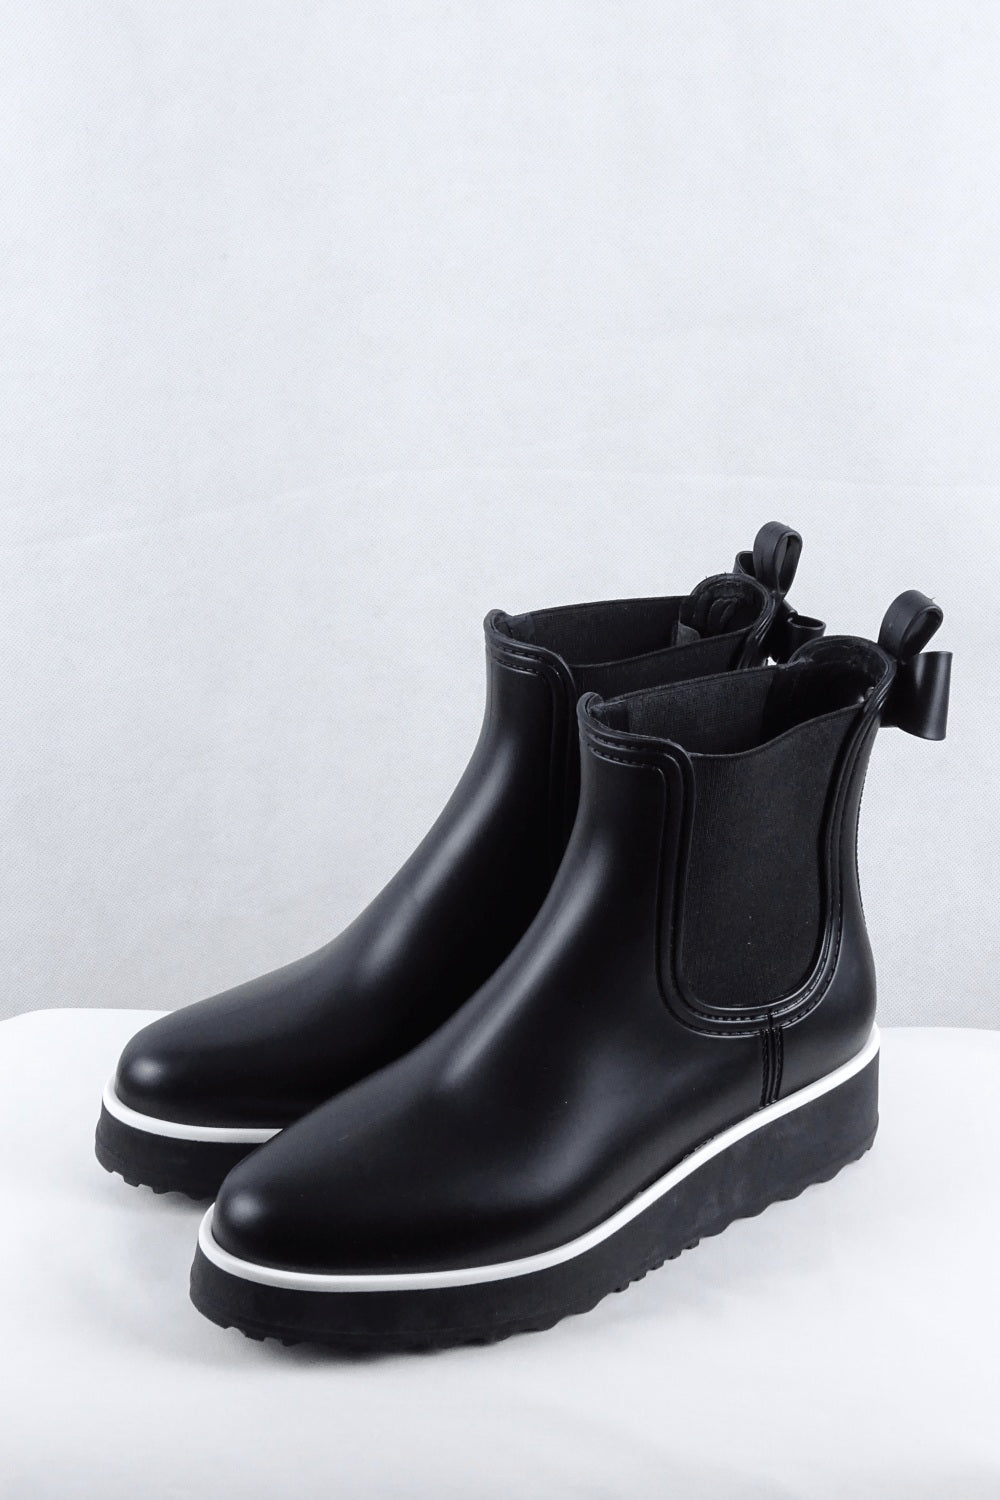 Kate Spade Black And White Boots 11